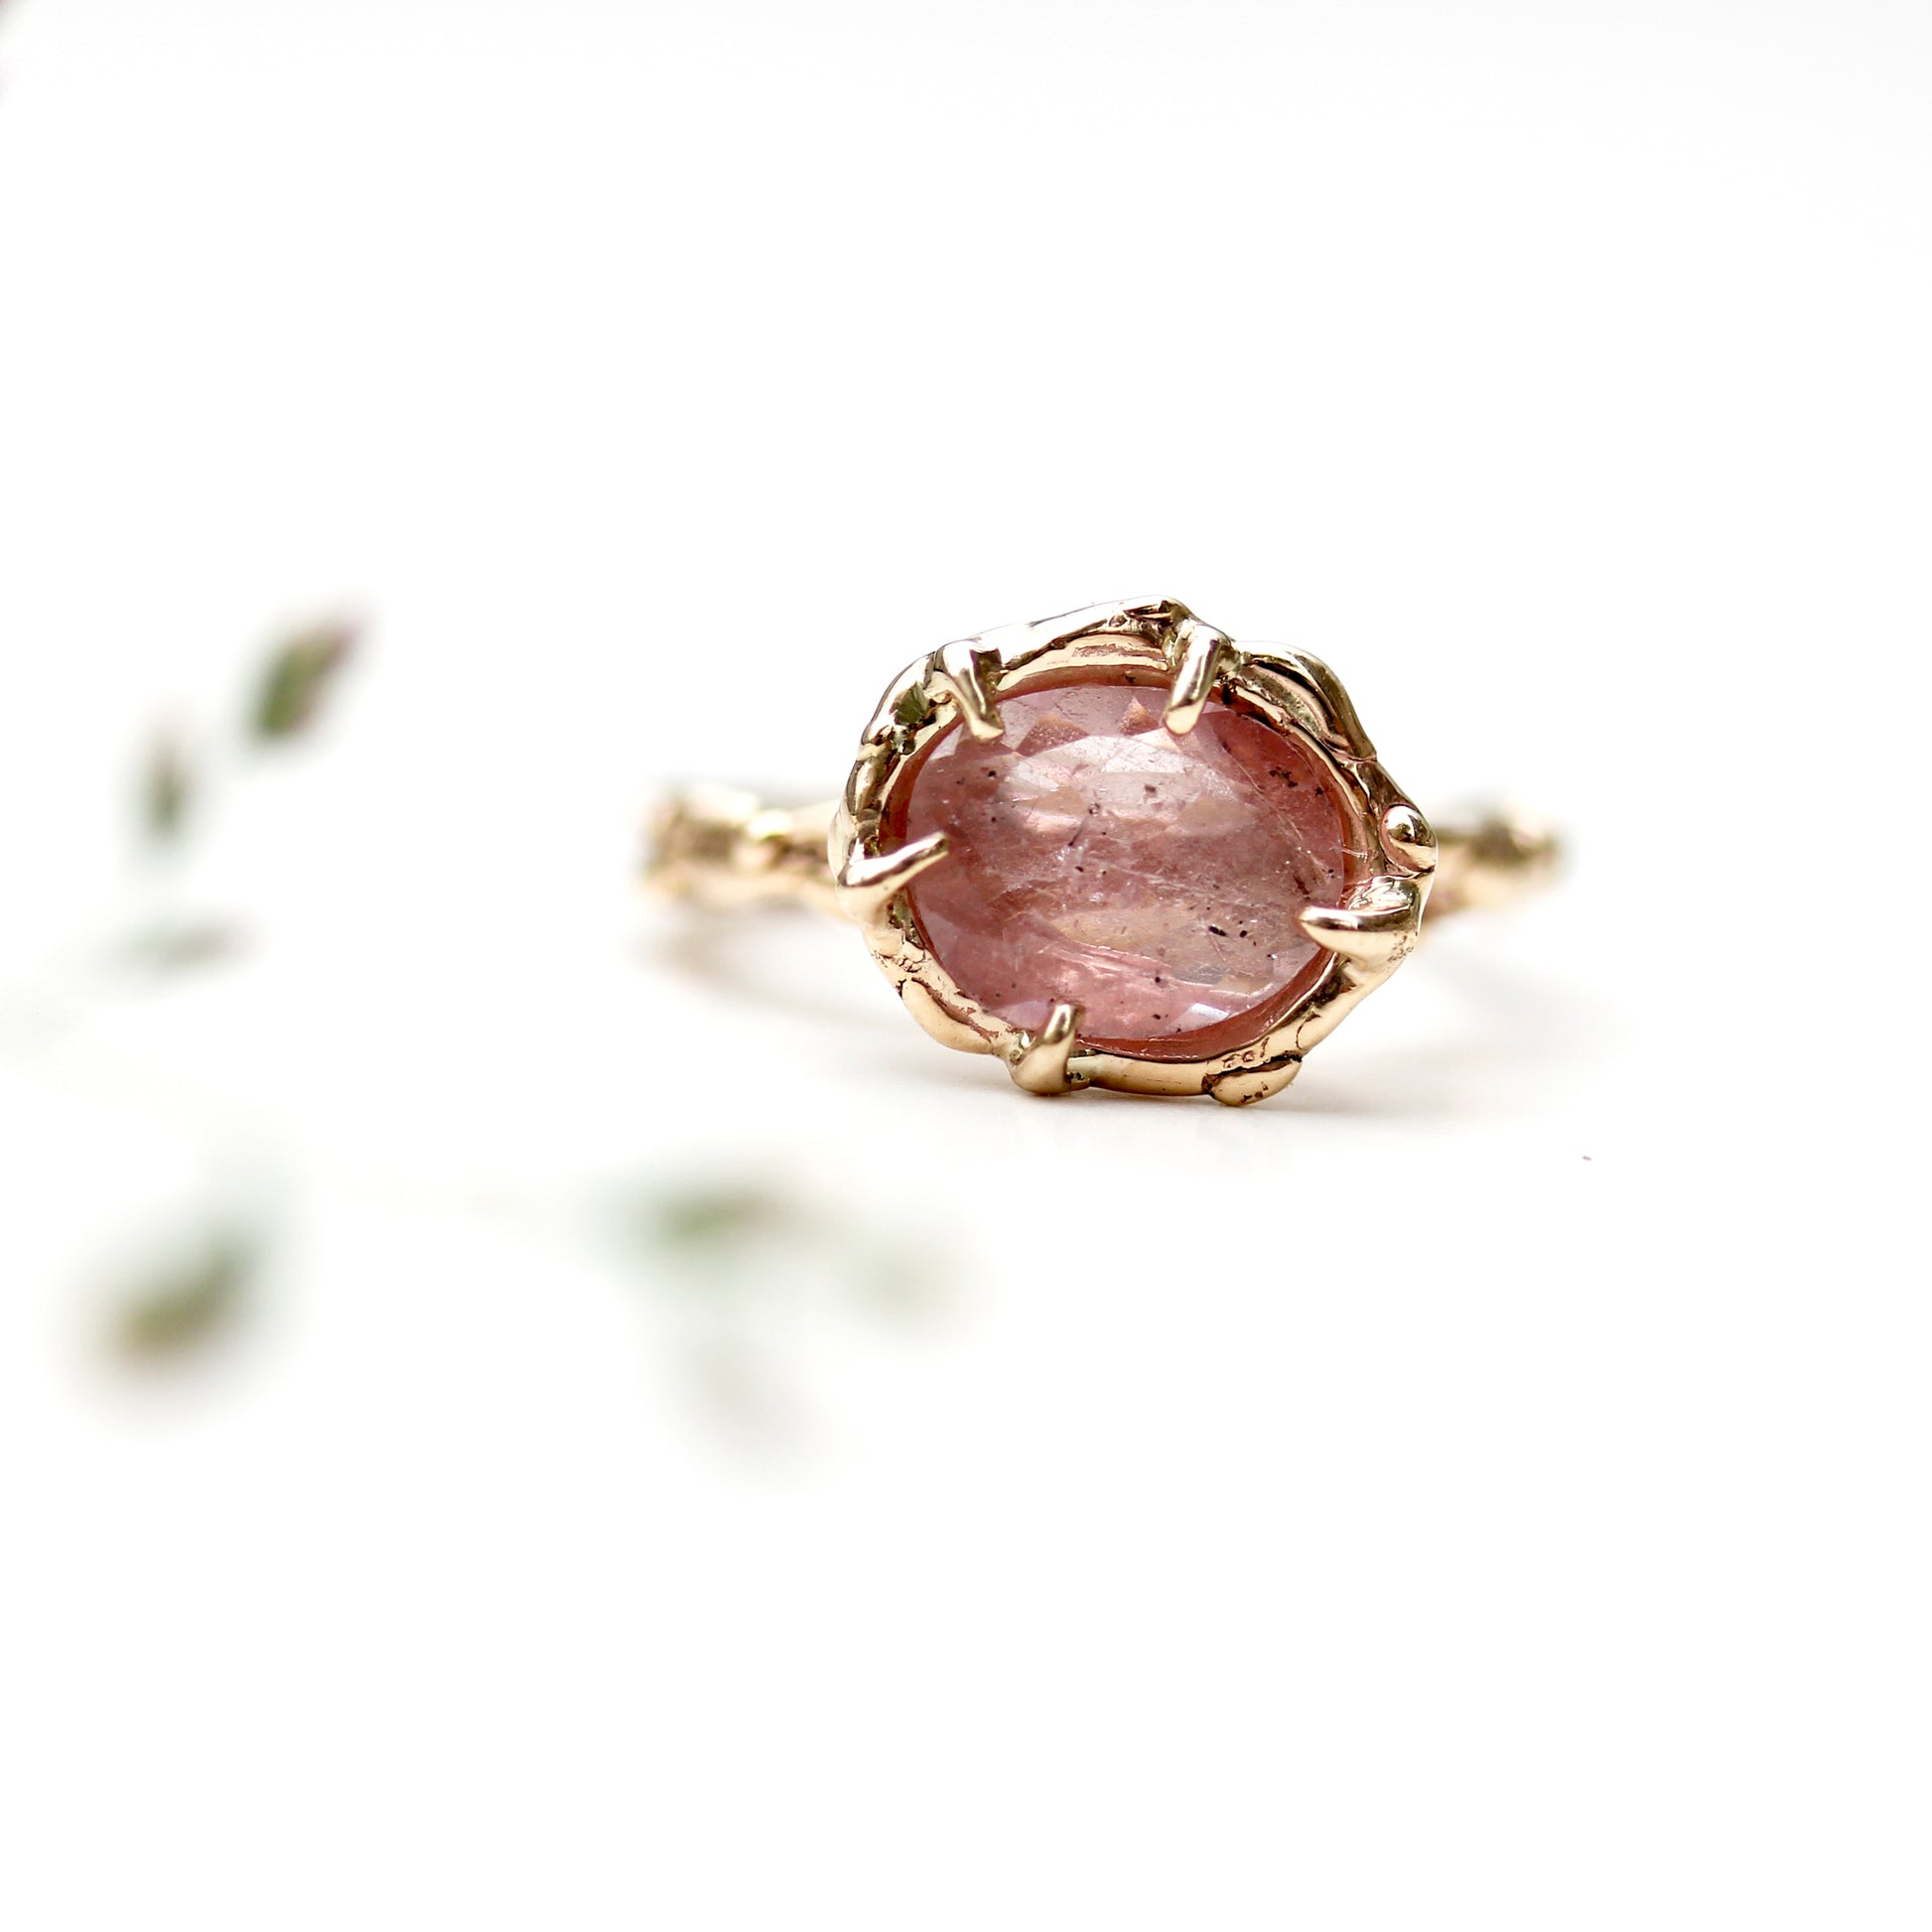 unique handmade pink sapphire engagement ring with hand wrought organic nature inspired dewdrop or water texture details